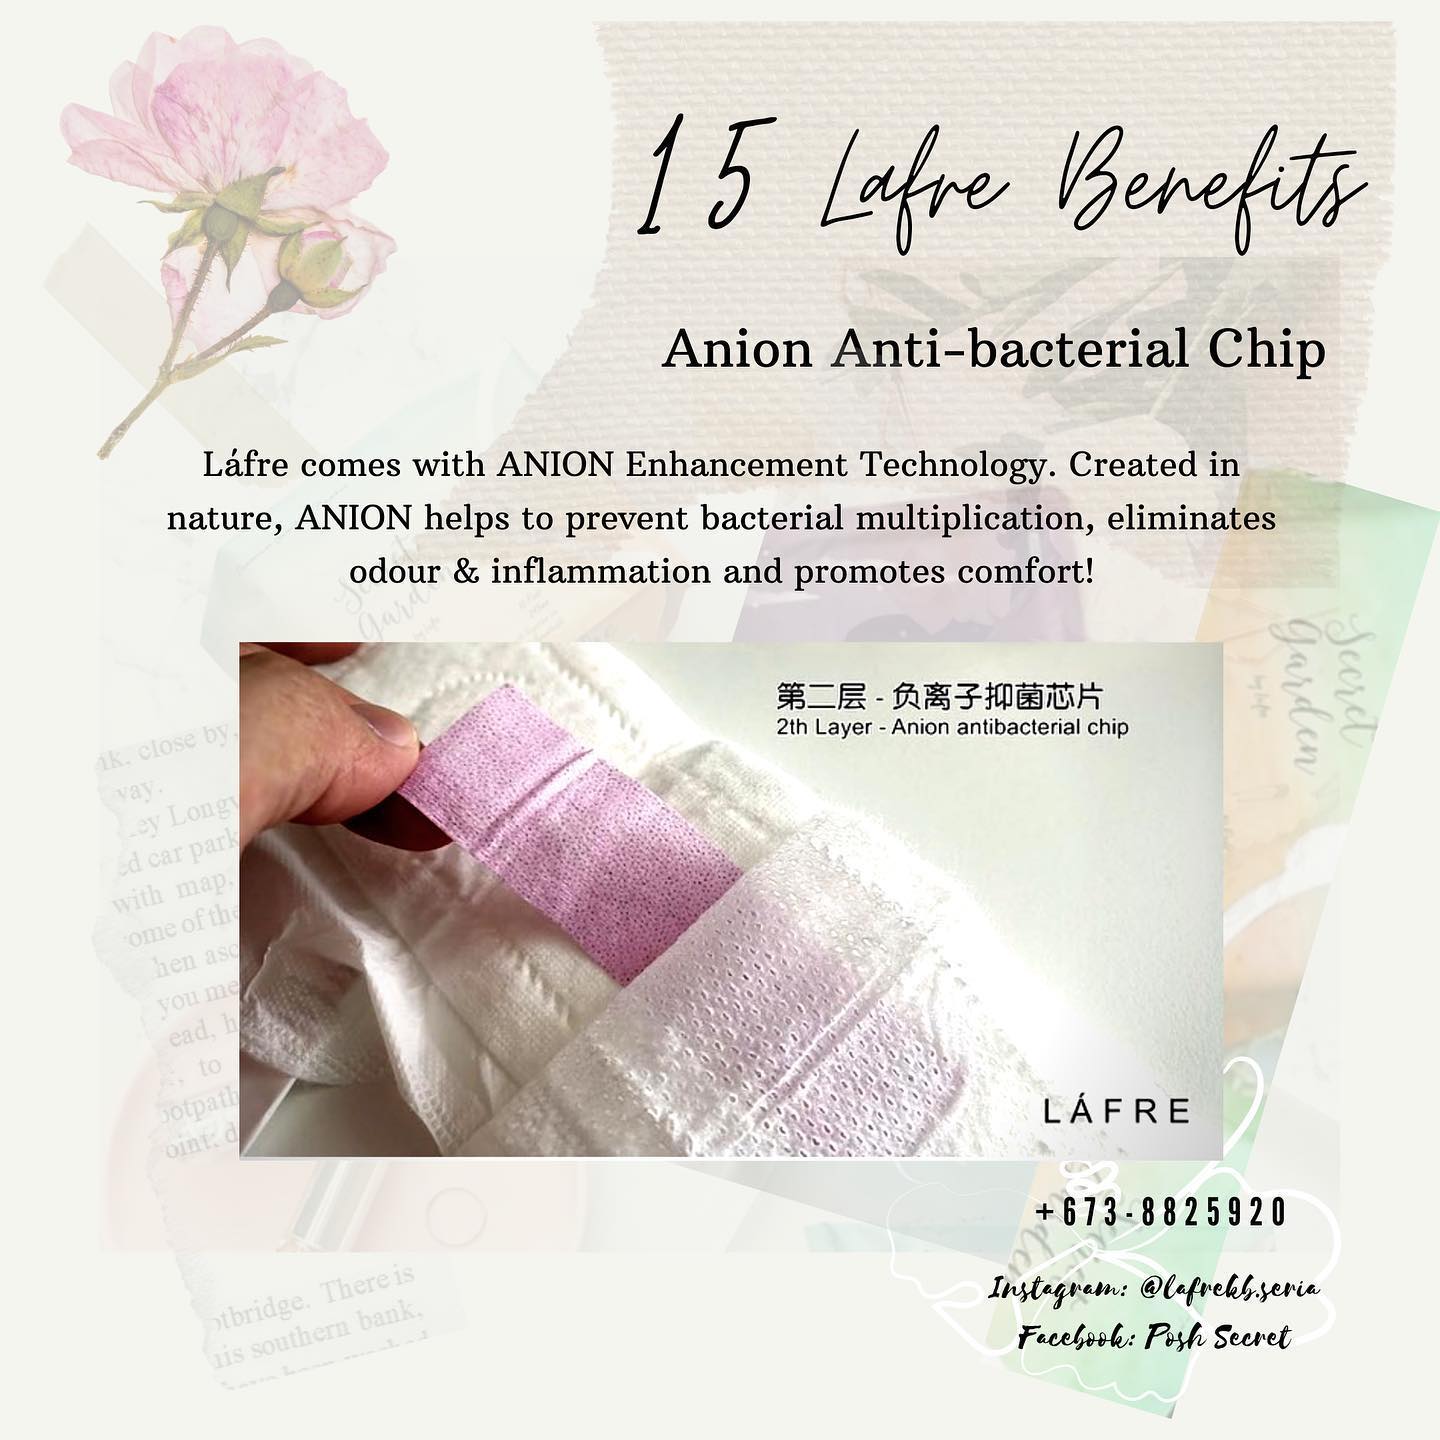 Anion Anti-bacterial Chip